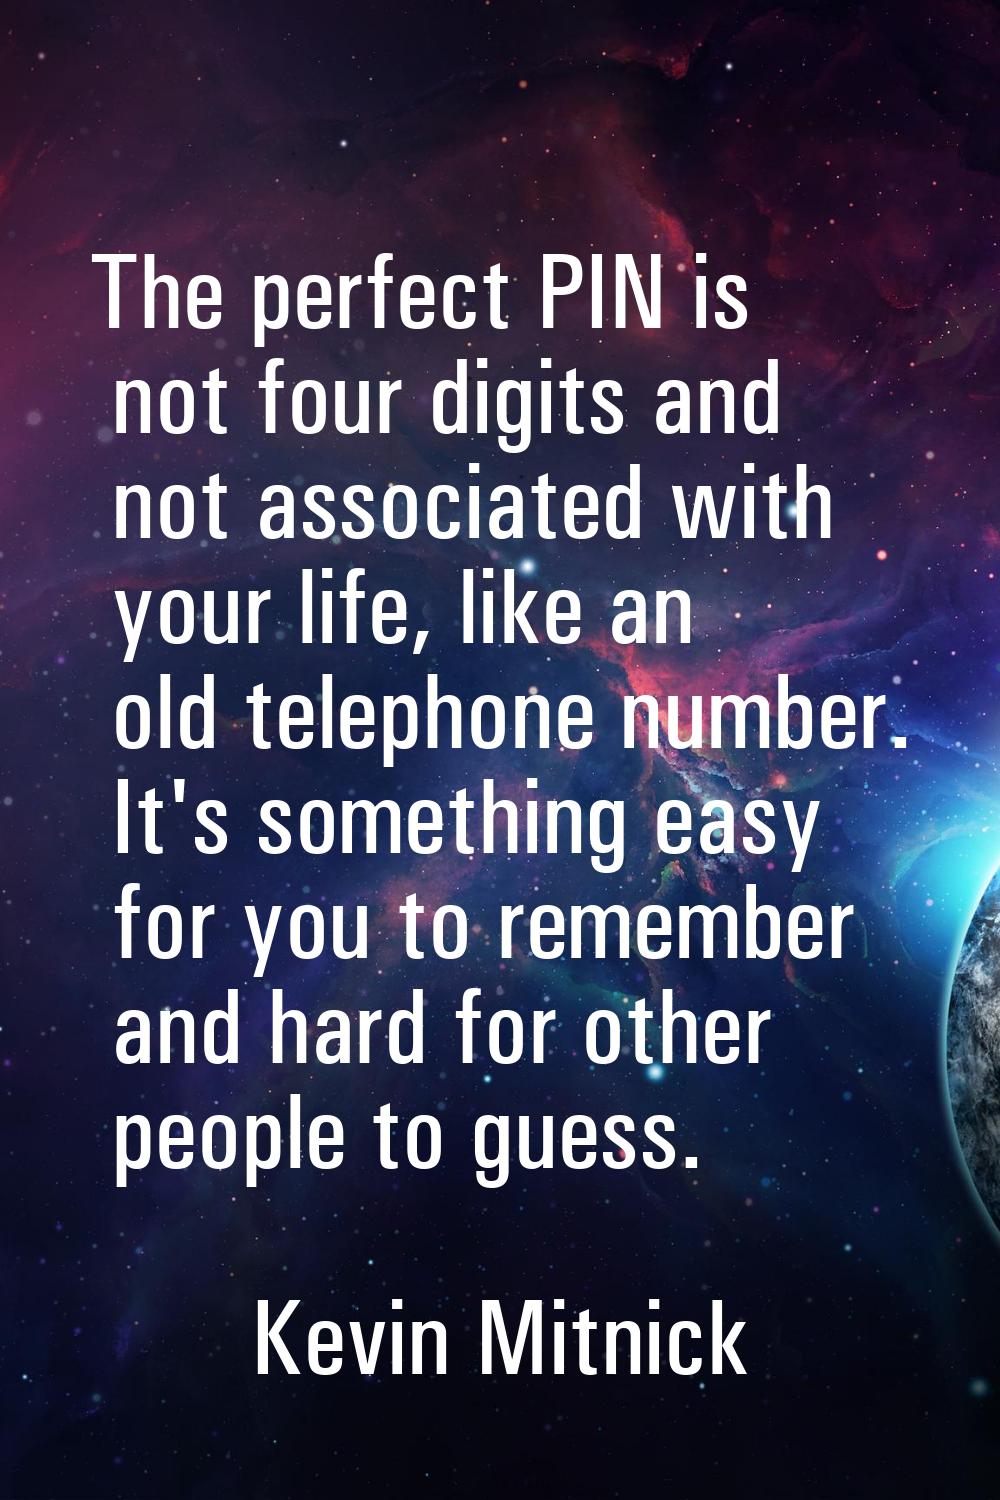 The perfect PIN is not four digits and not associated with your life, like an old telephone number.